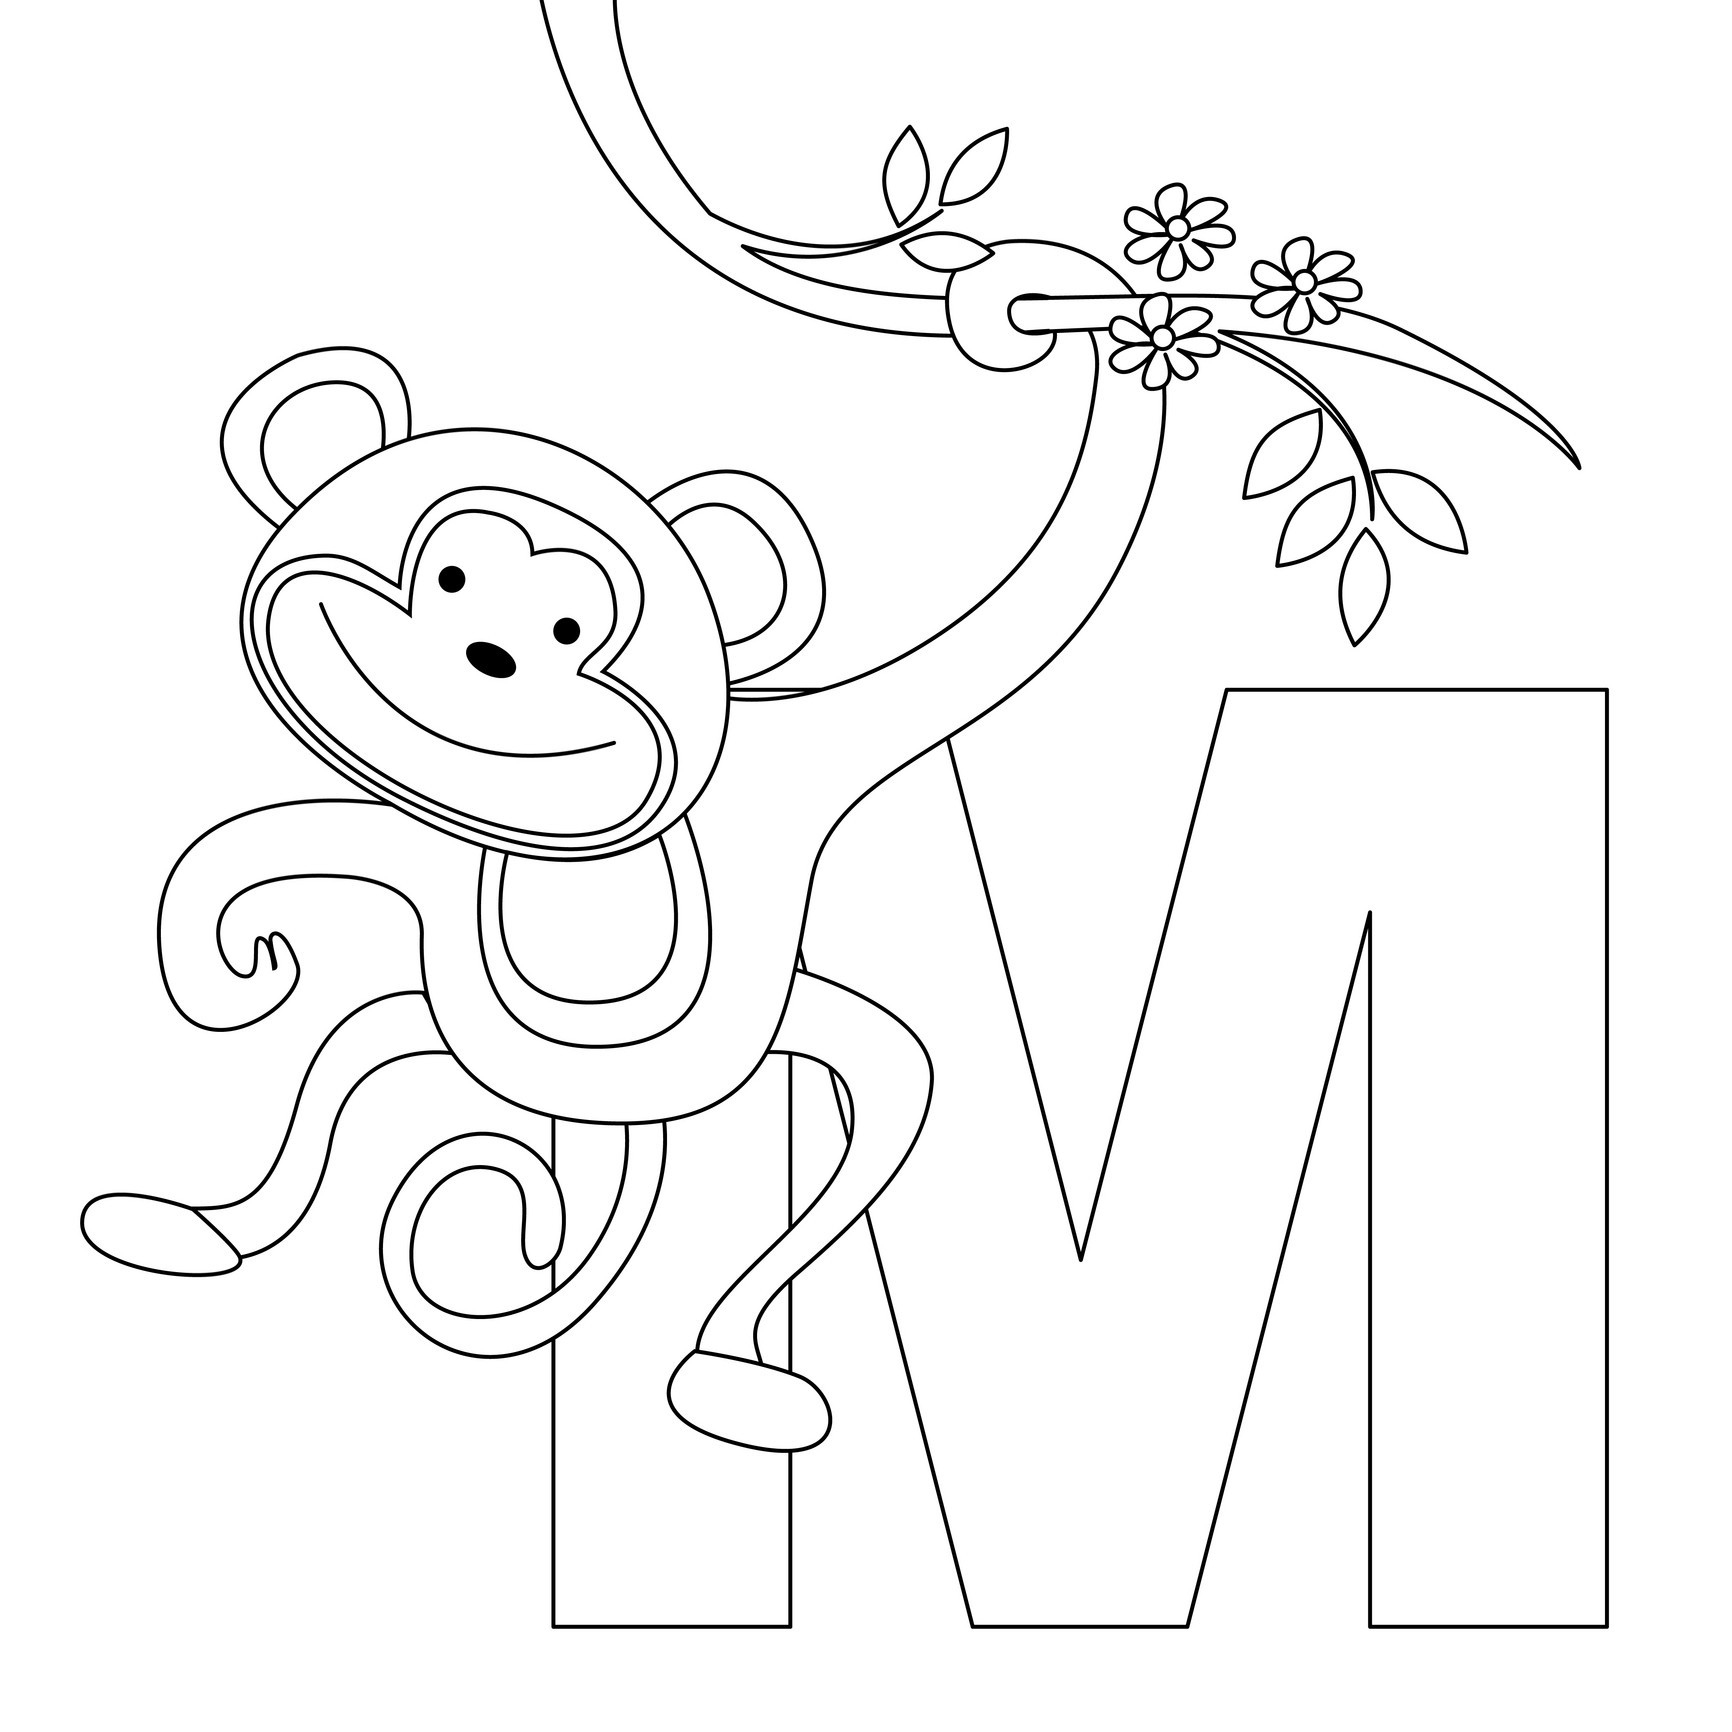  Abc Coloring Sheets For Kids 10